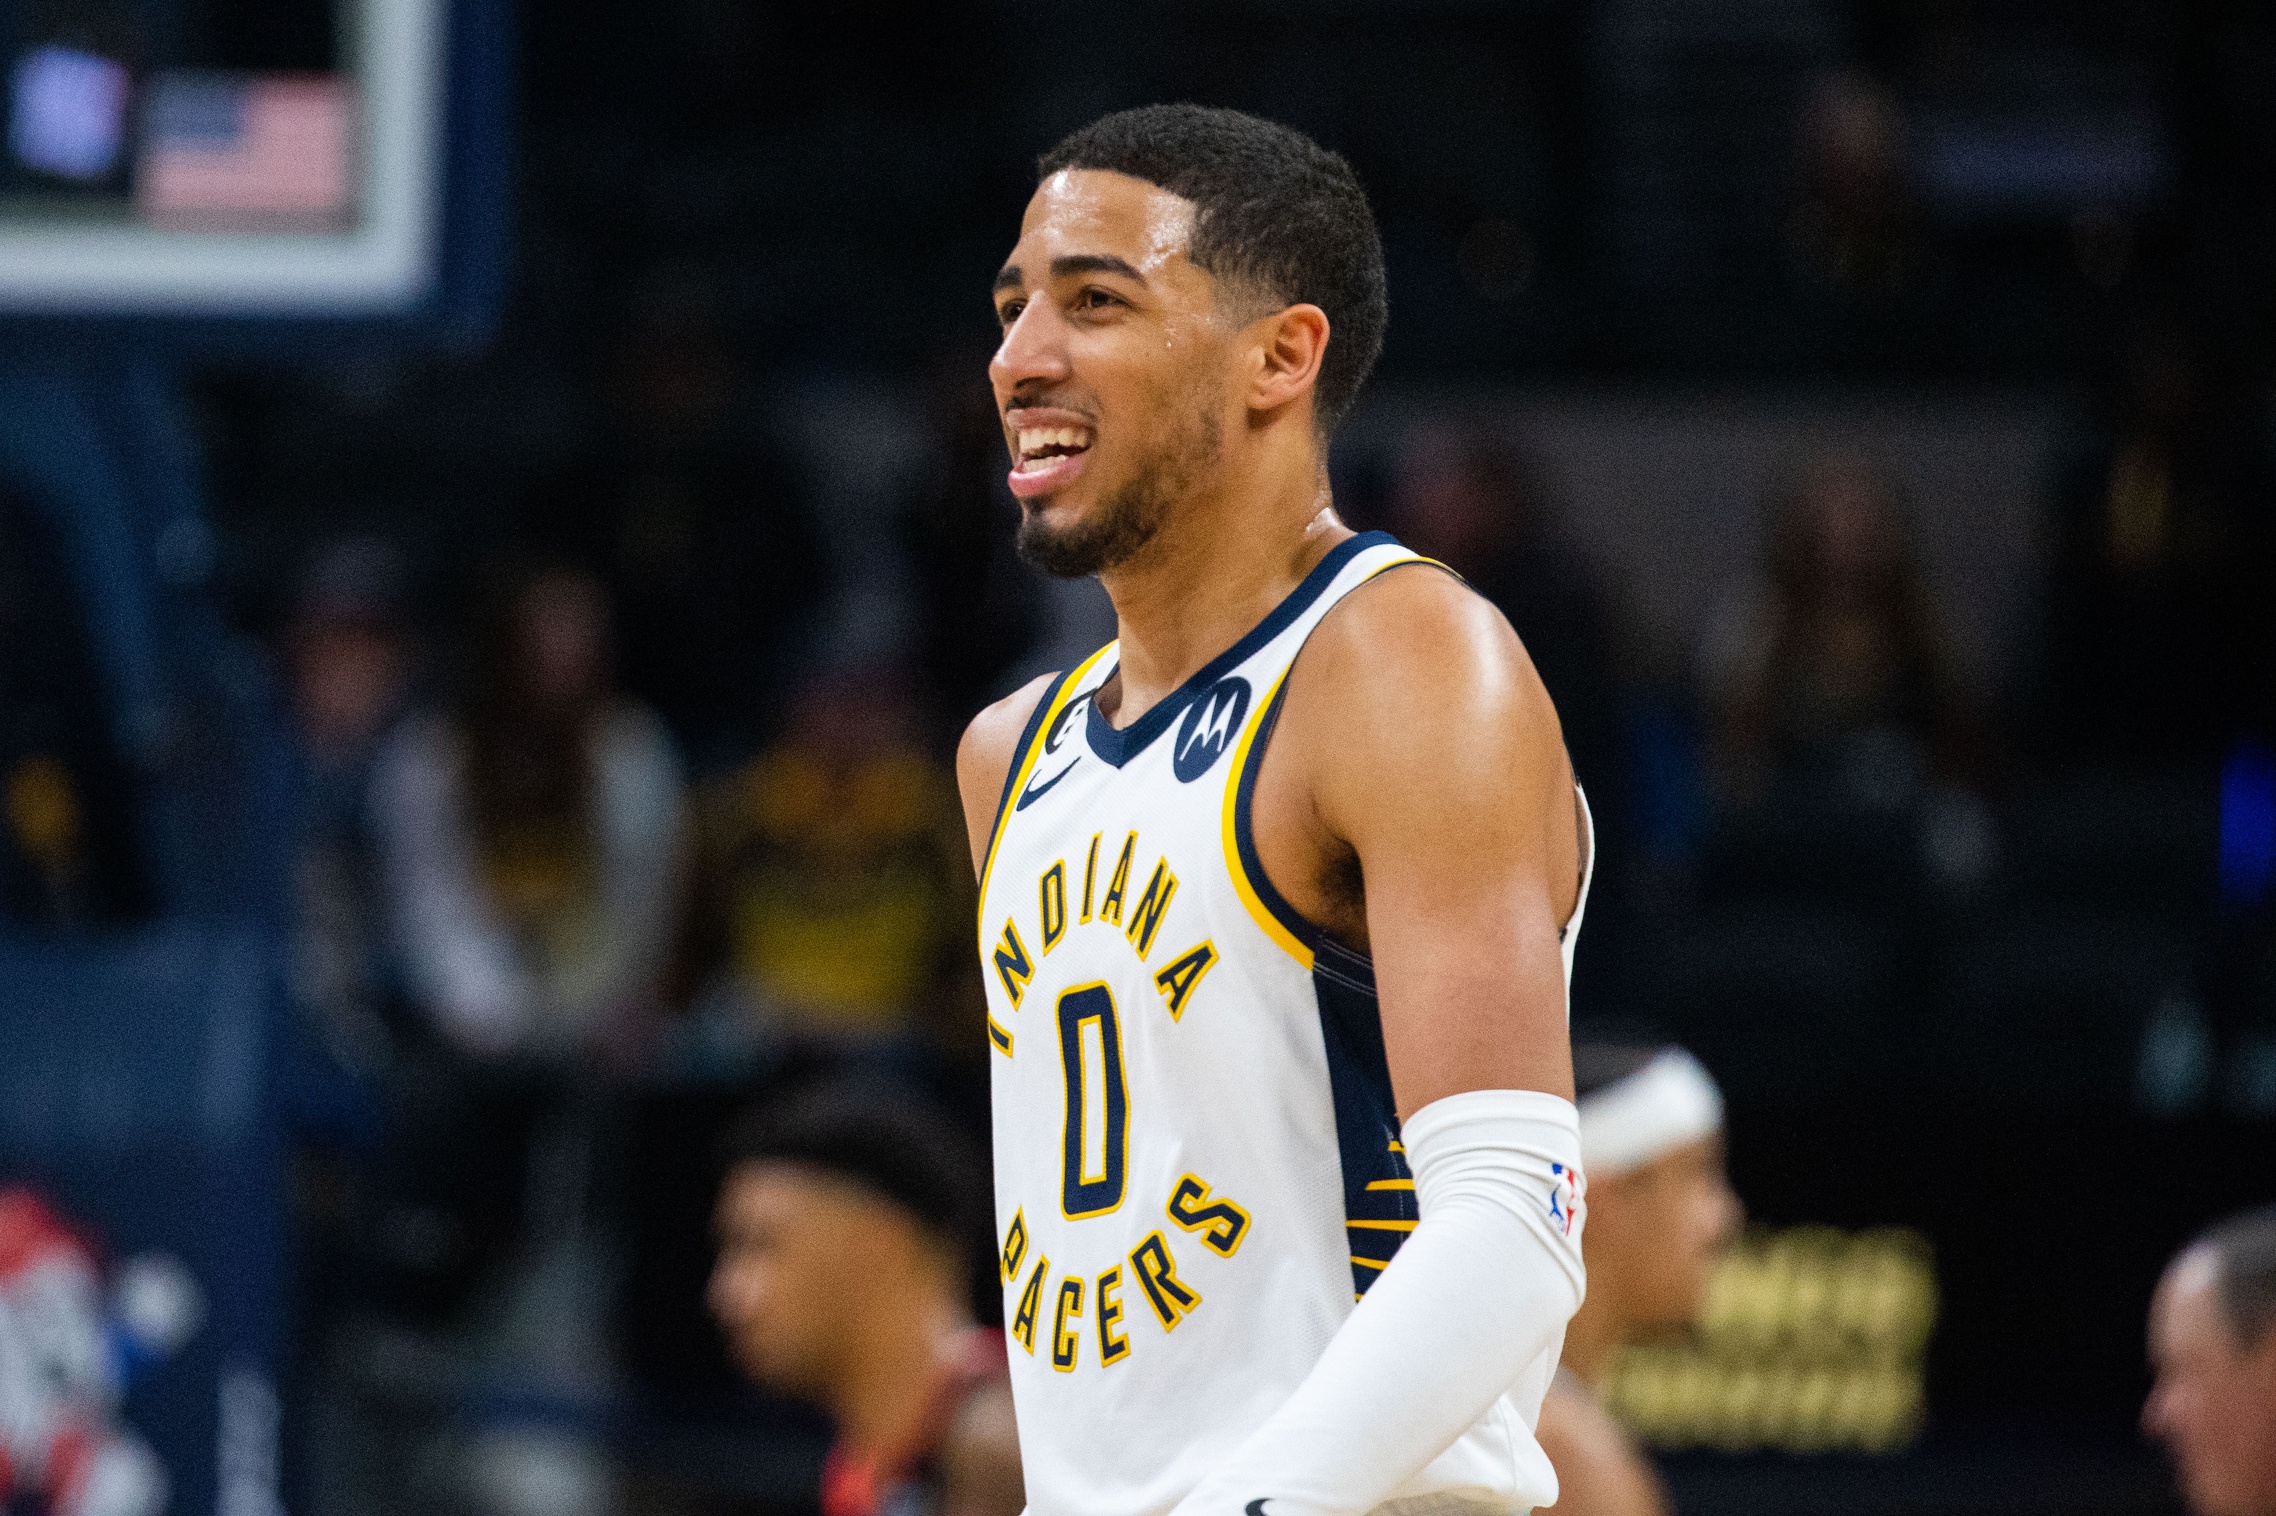 Mar 9, 2023; Indianapolis, Indiana, USA; Indiana Pacers guard Tyrese Haliburton (0) celebrates a made shot in the overtime against the Houston Rockets at Gainbridge Fieldhouse. Mandatory Credit: Trevor Ruszkowski-USA TODAY Sports